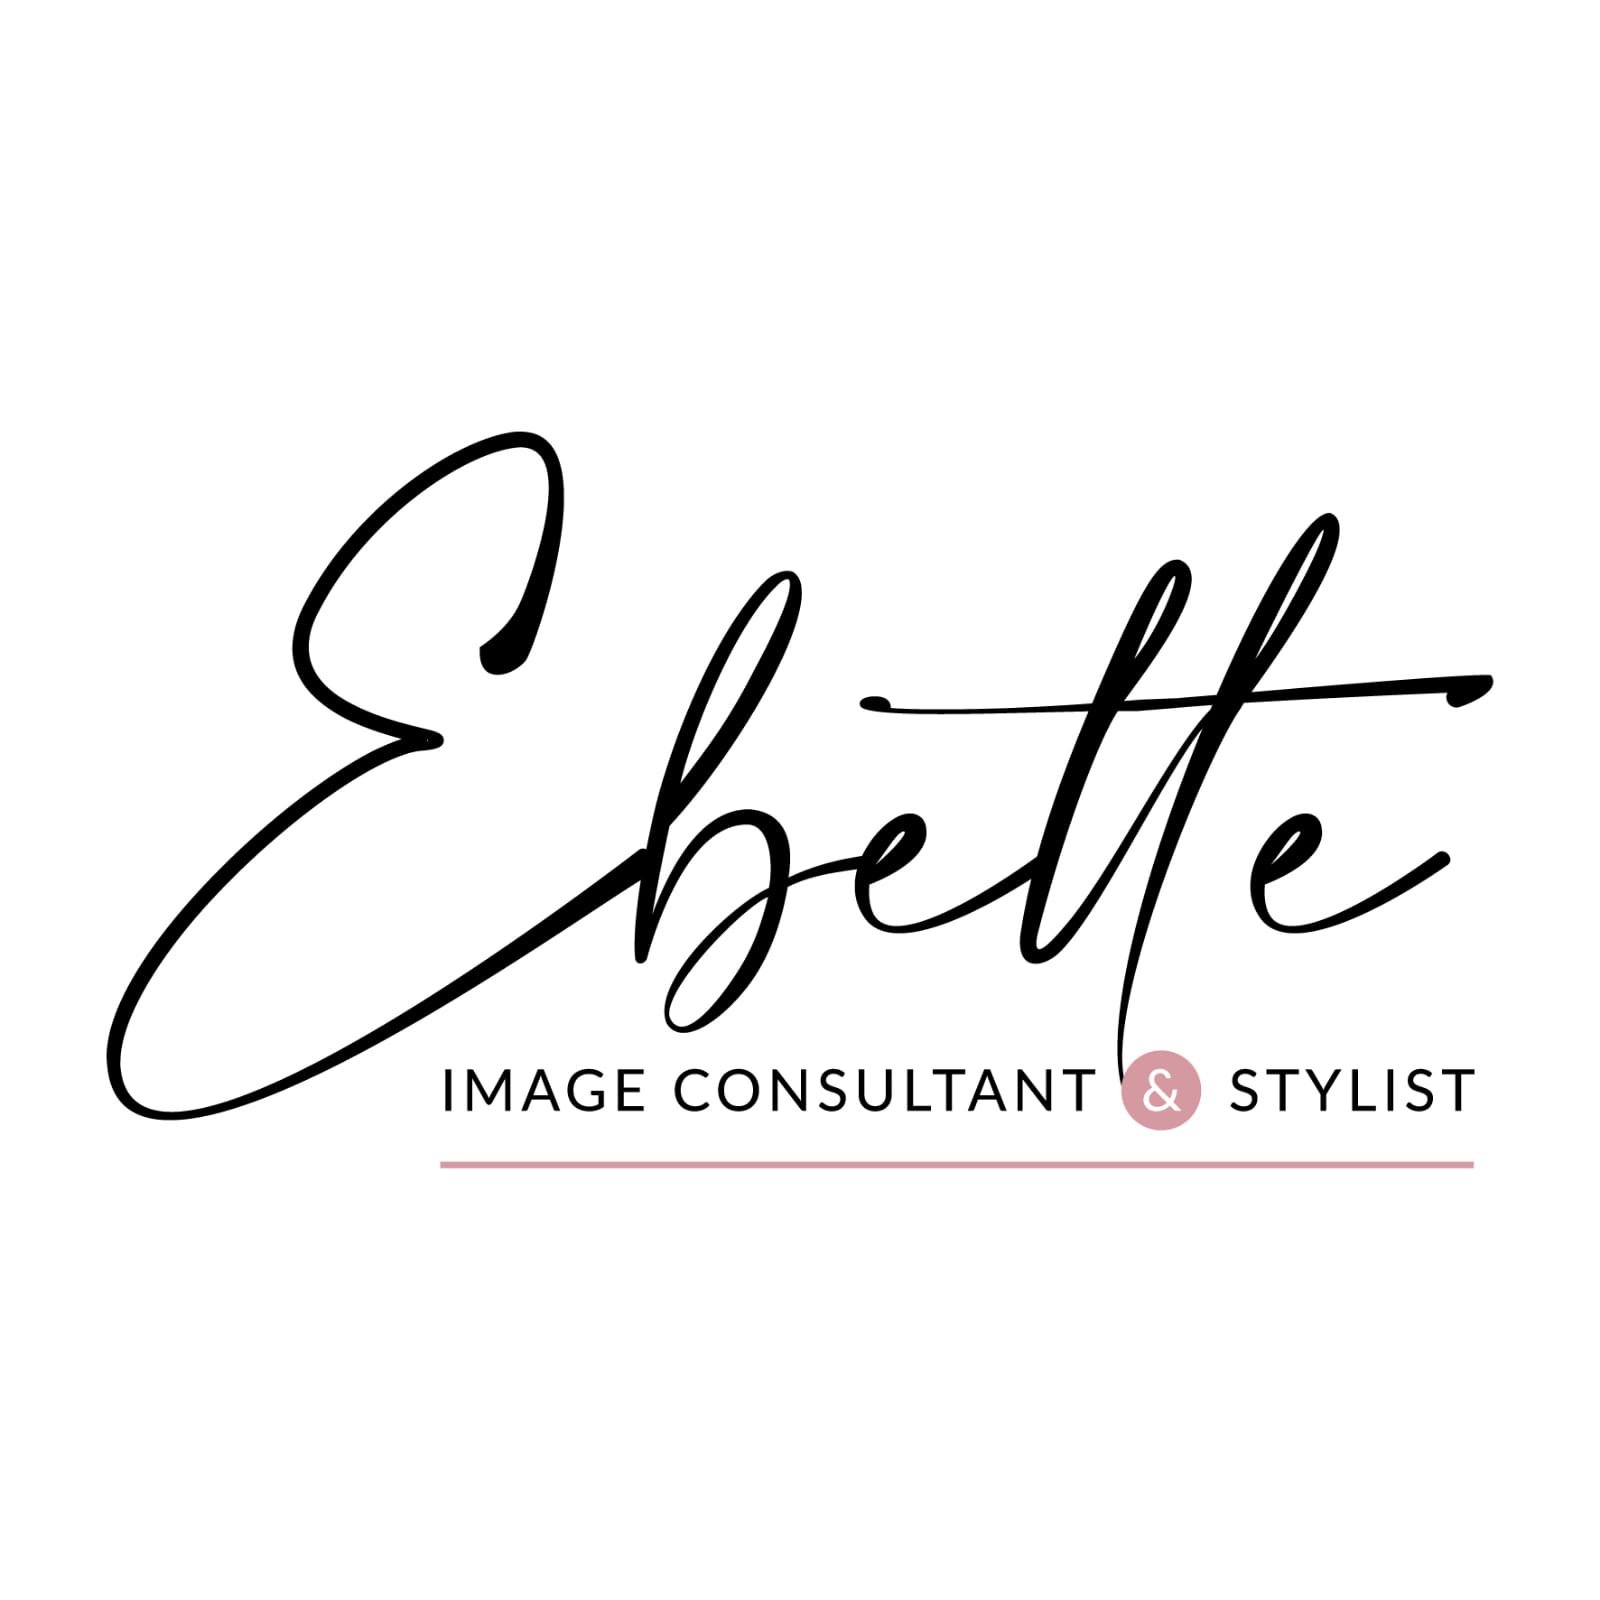 Image Consulting and Styling